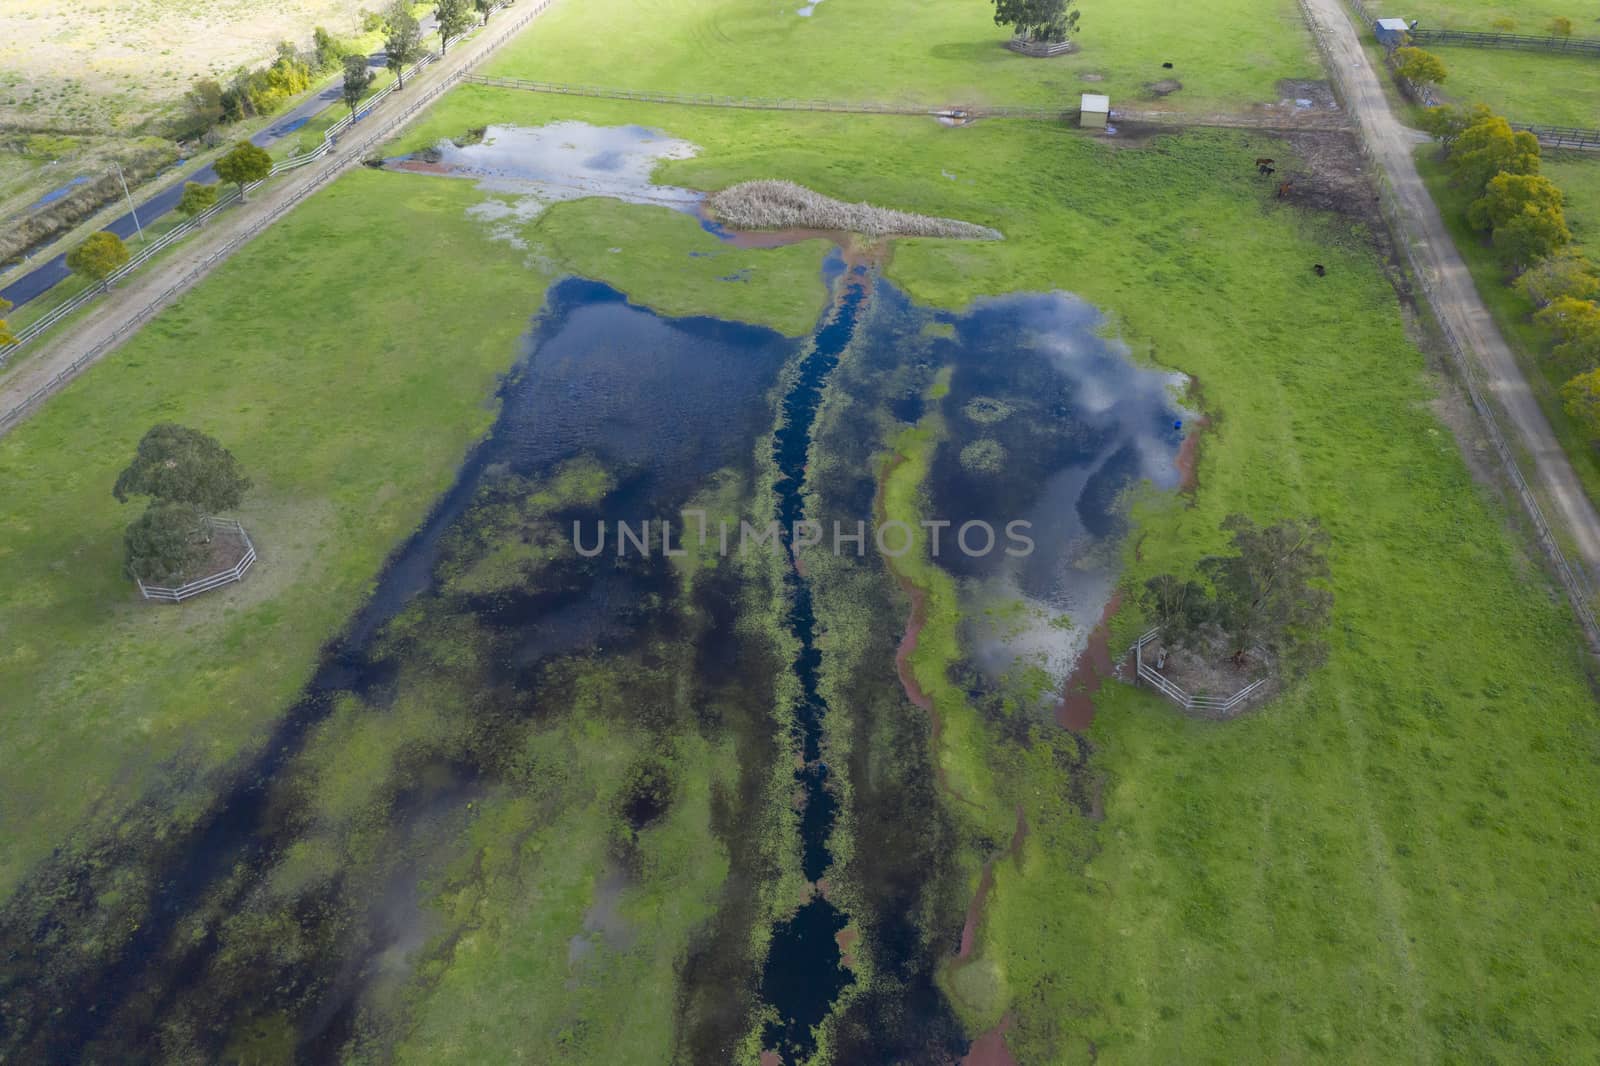 Aerial photograph of flooding in an agricultural field by WittkePhotos